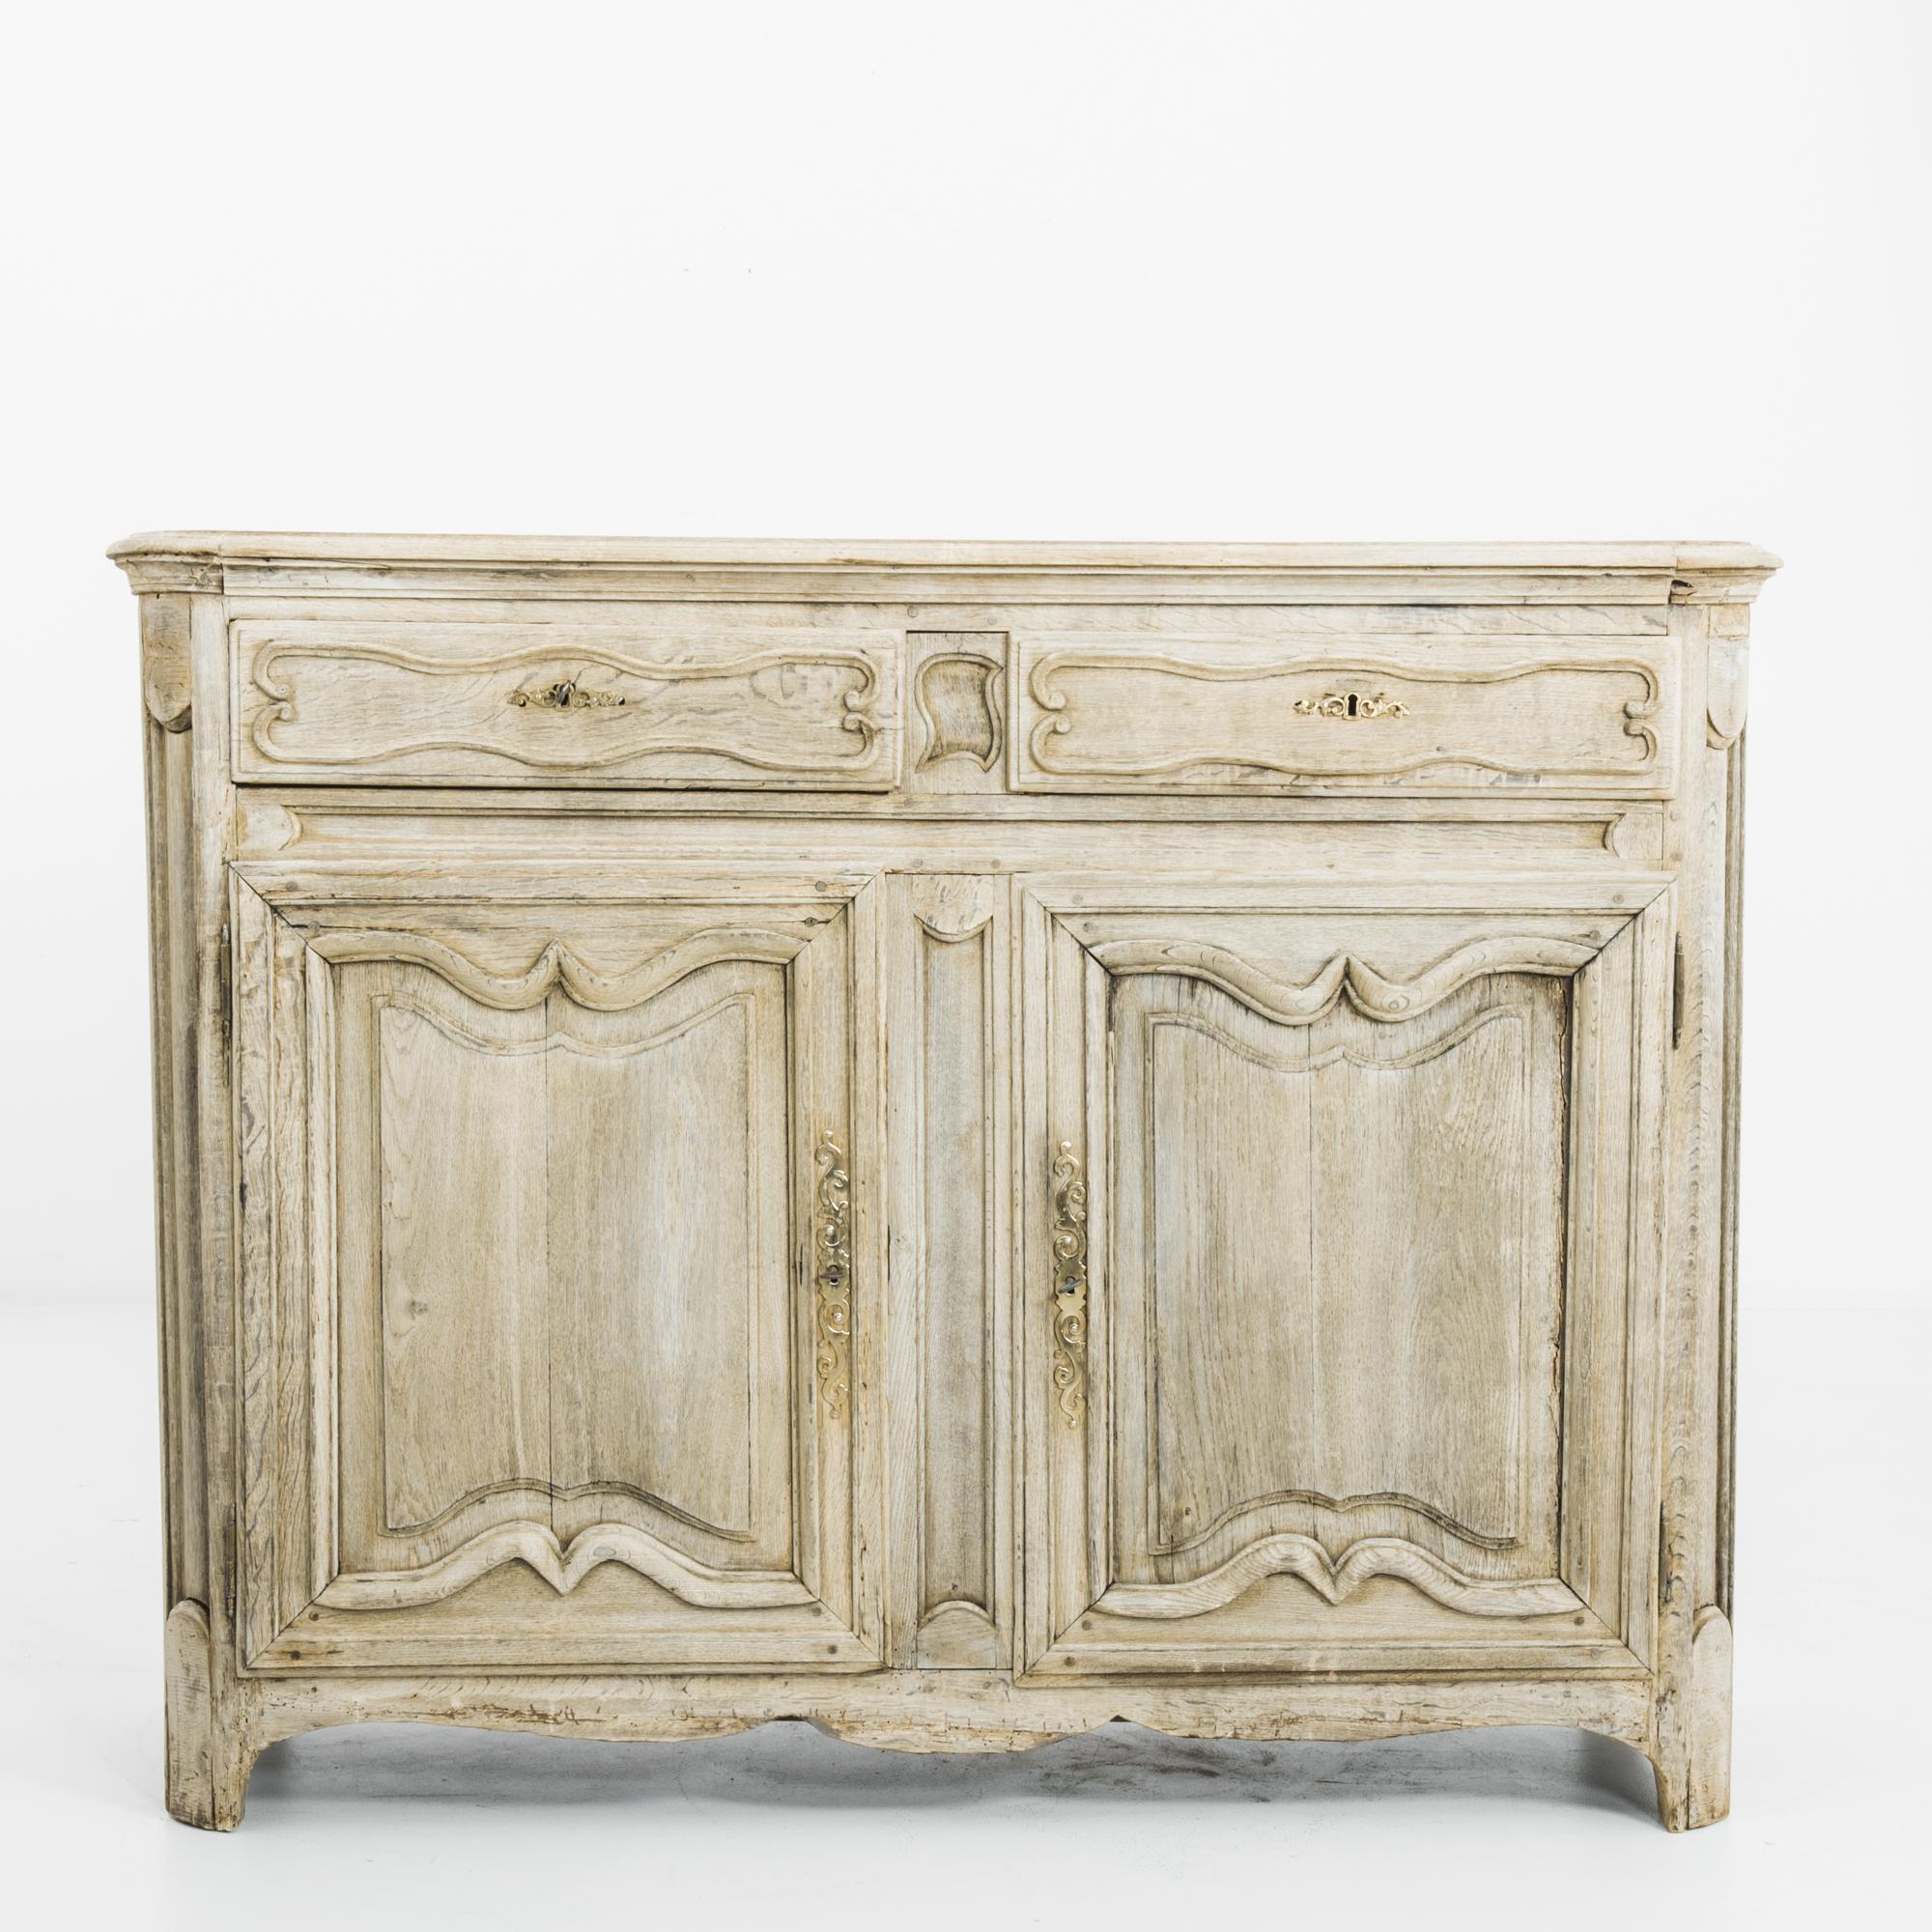 A two door and two drawewr oak buffet from 1800s France. The pale, pearlescent tone of the oak sets off the elaborate curves of the panelling to perfection. The contoured edges of the cabinet lend a graceful inflection to the silhouette; carved